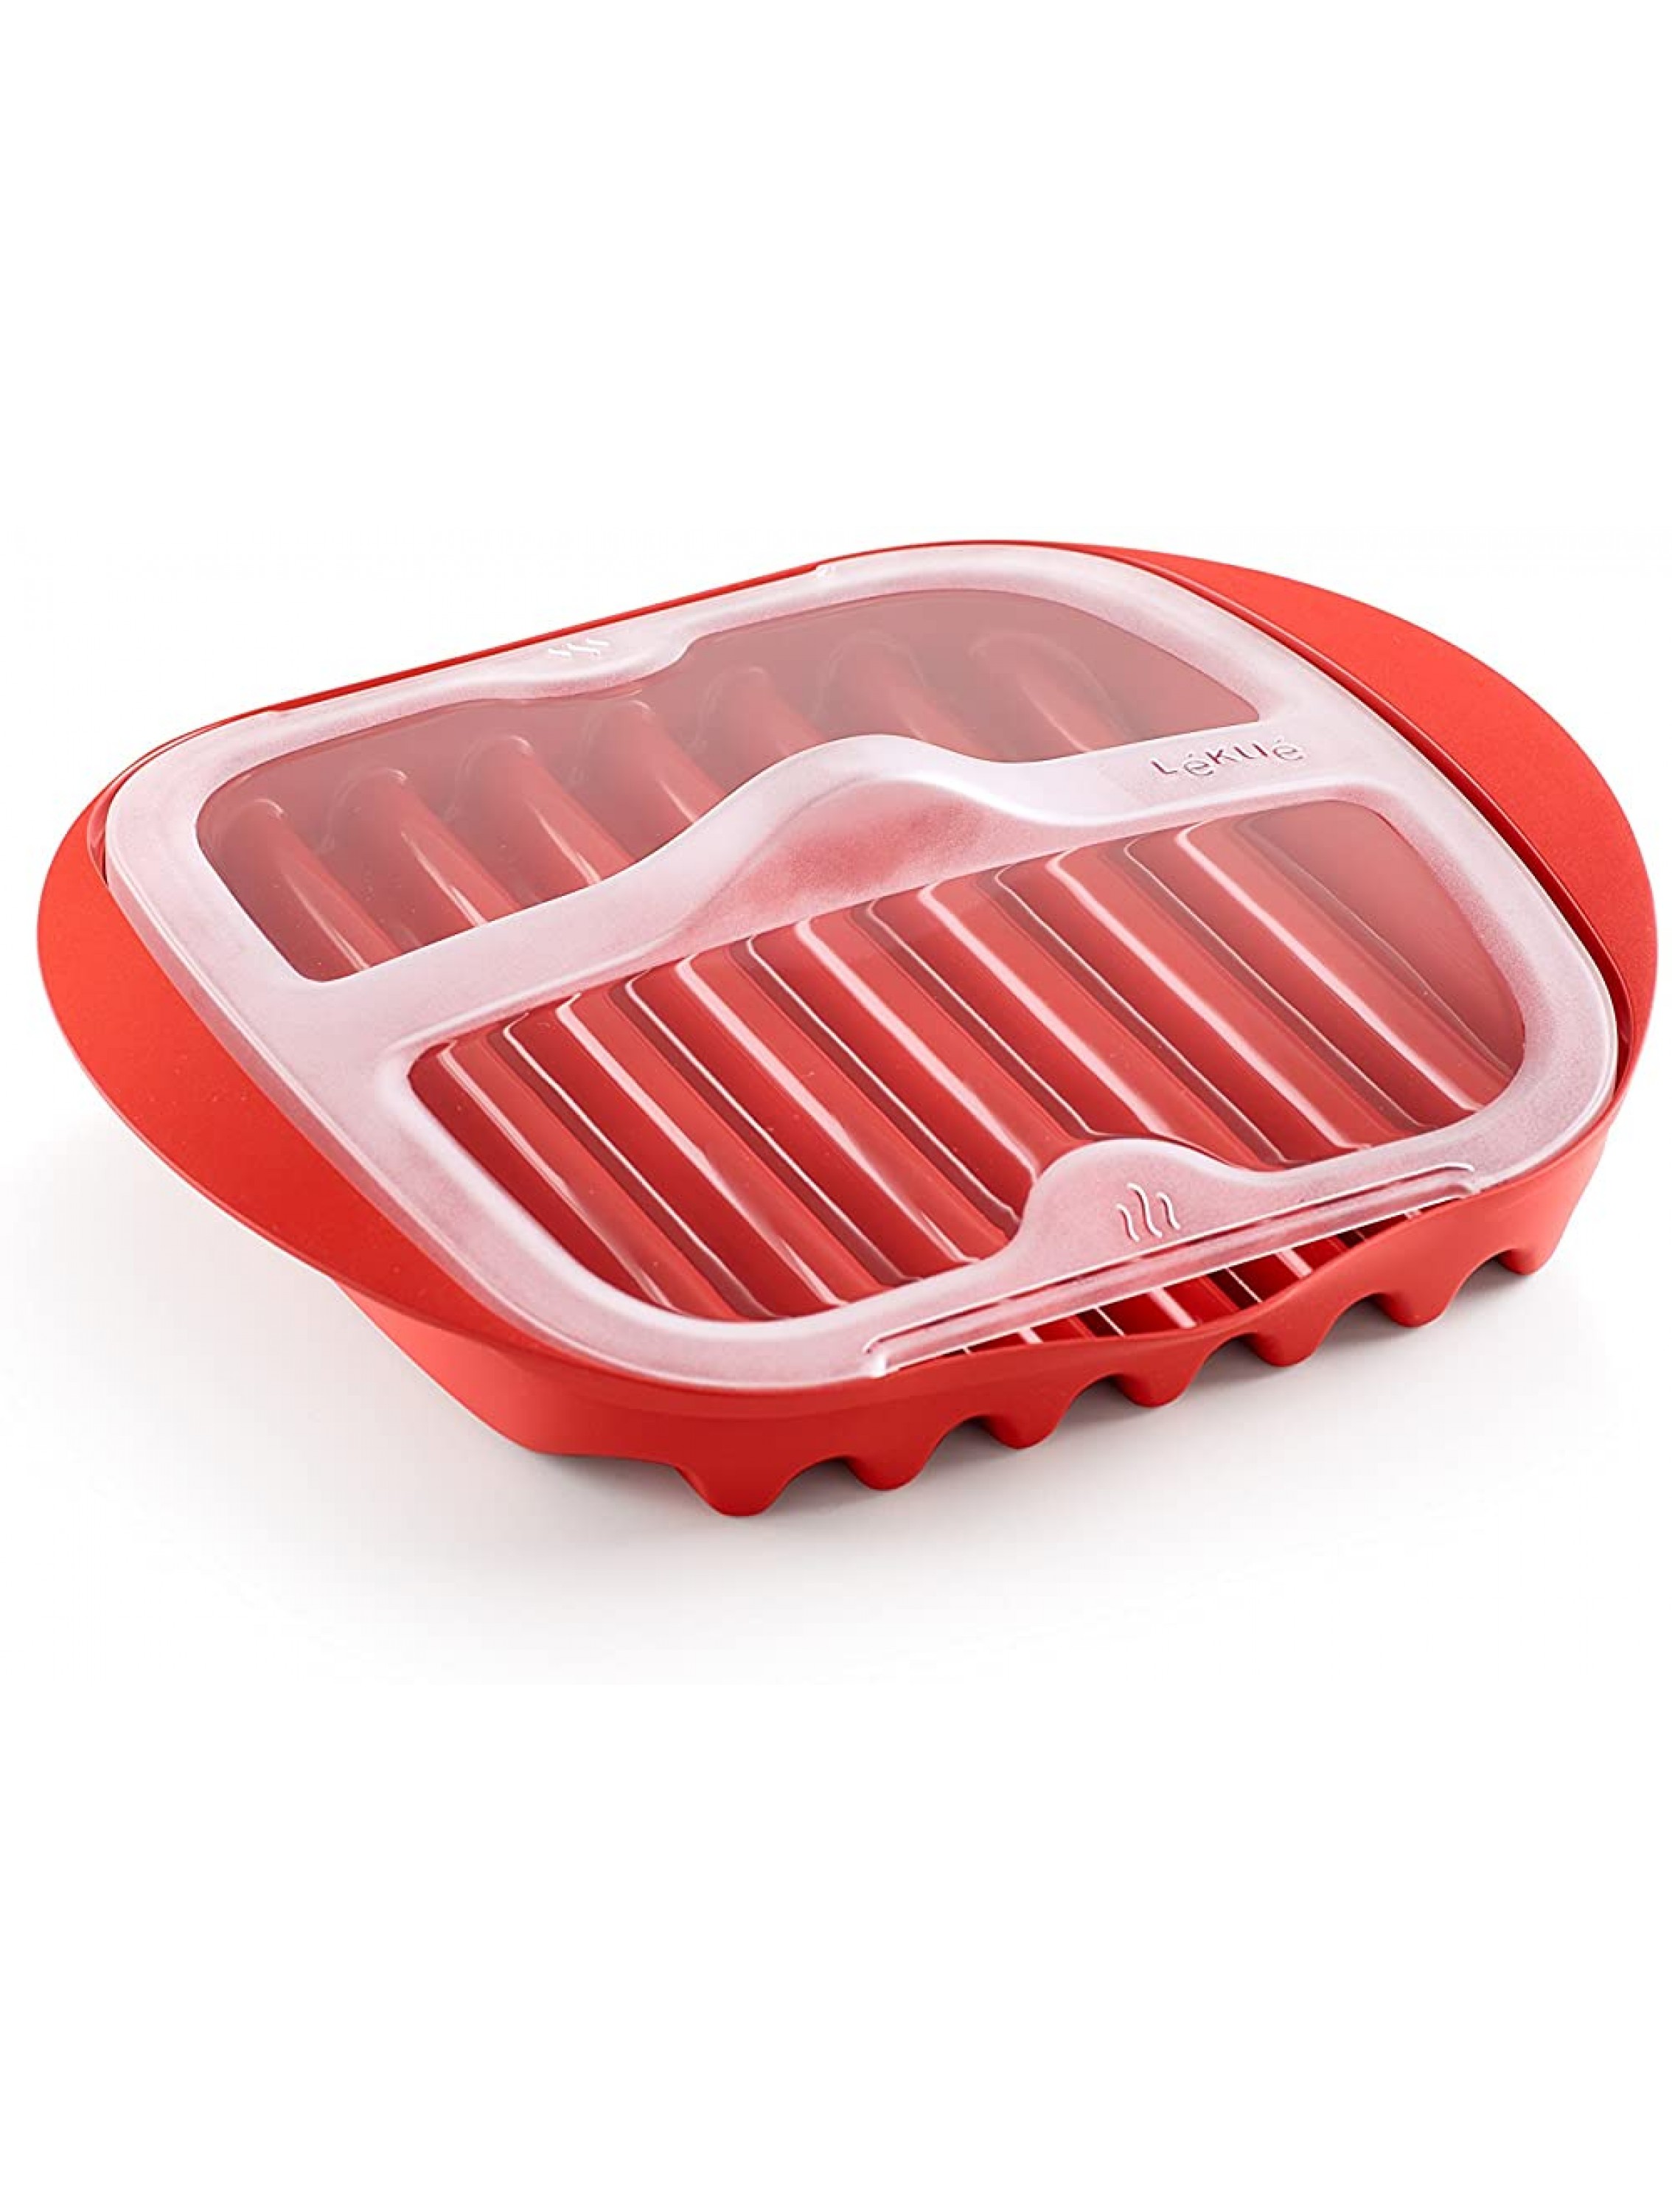 Lekue Microwave Bacon Maker Cooker with Lid 11.02 L x 9.8 W x 2.3 H Red - BAKJQ0DYR